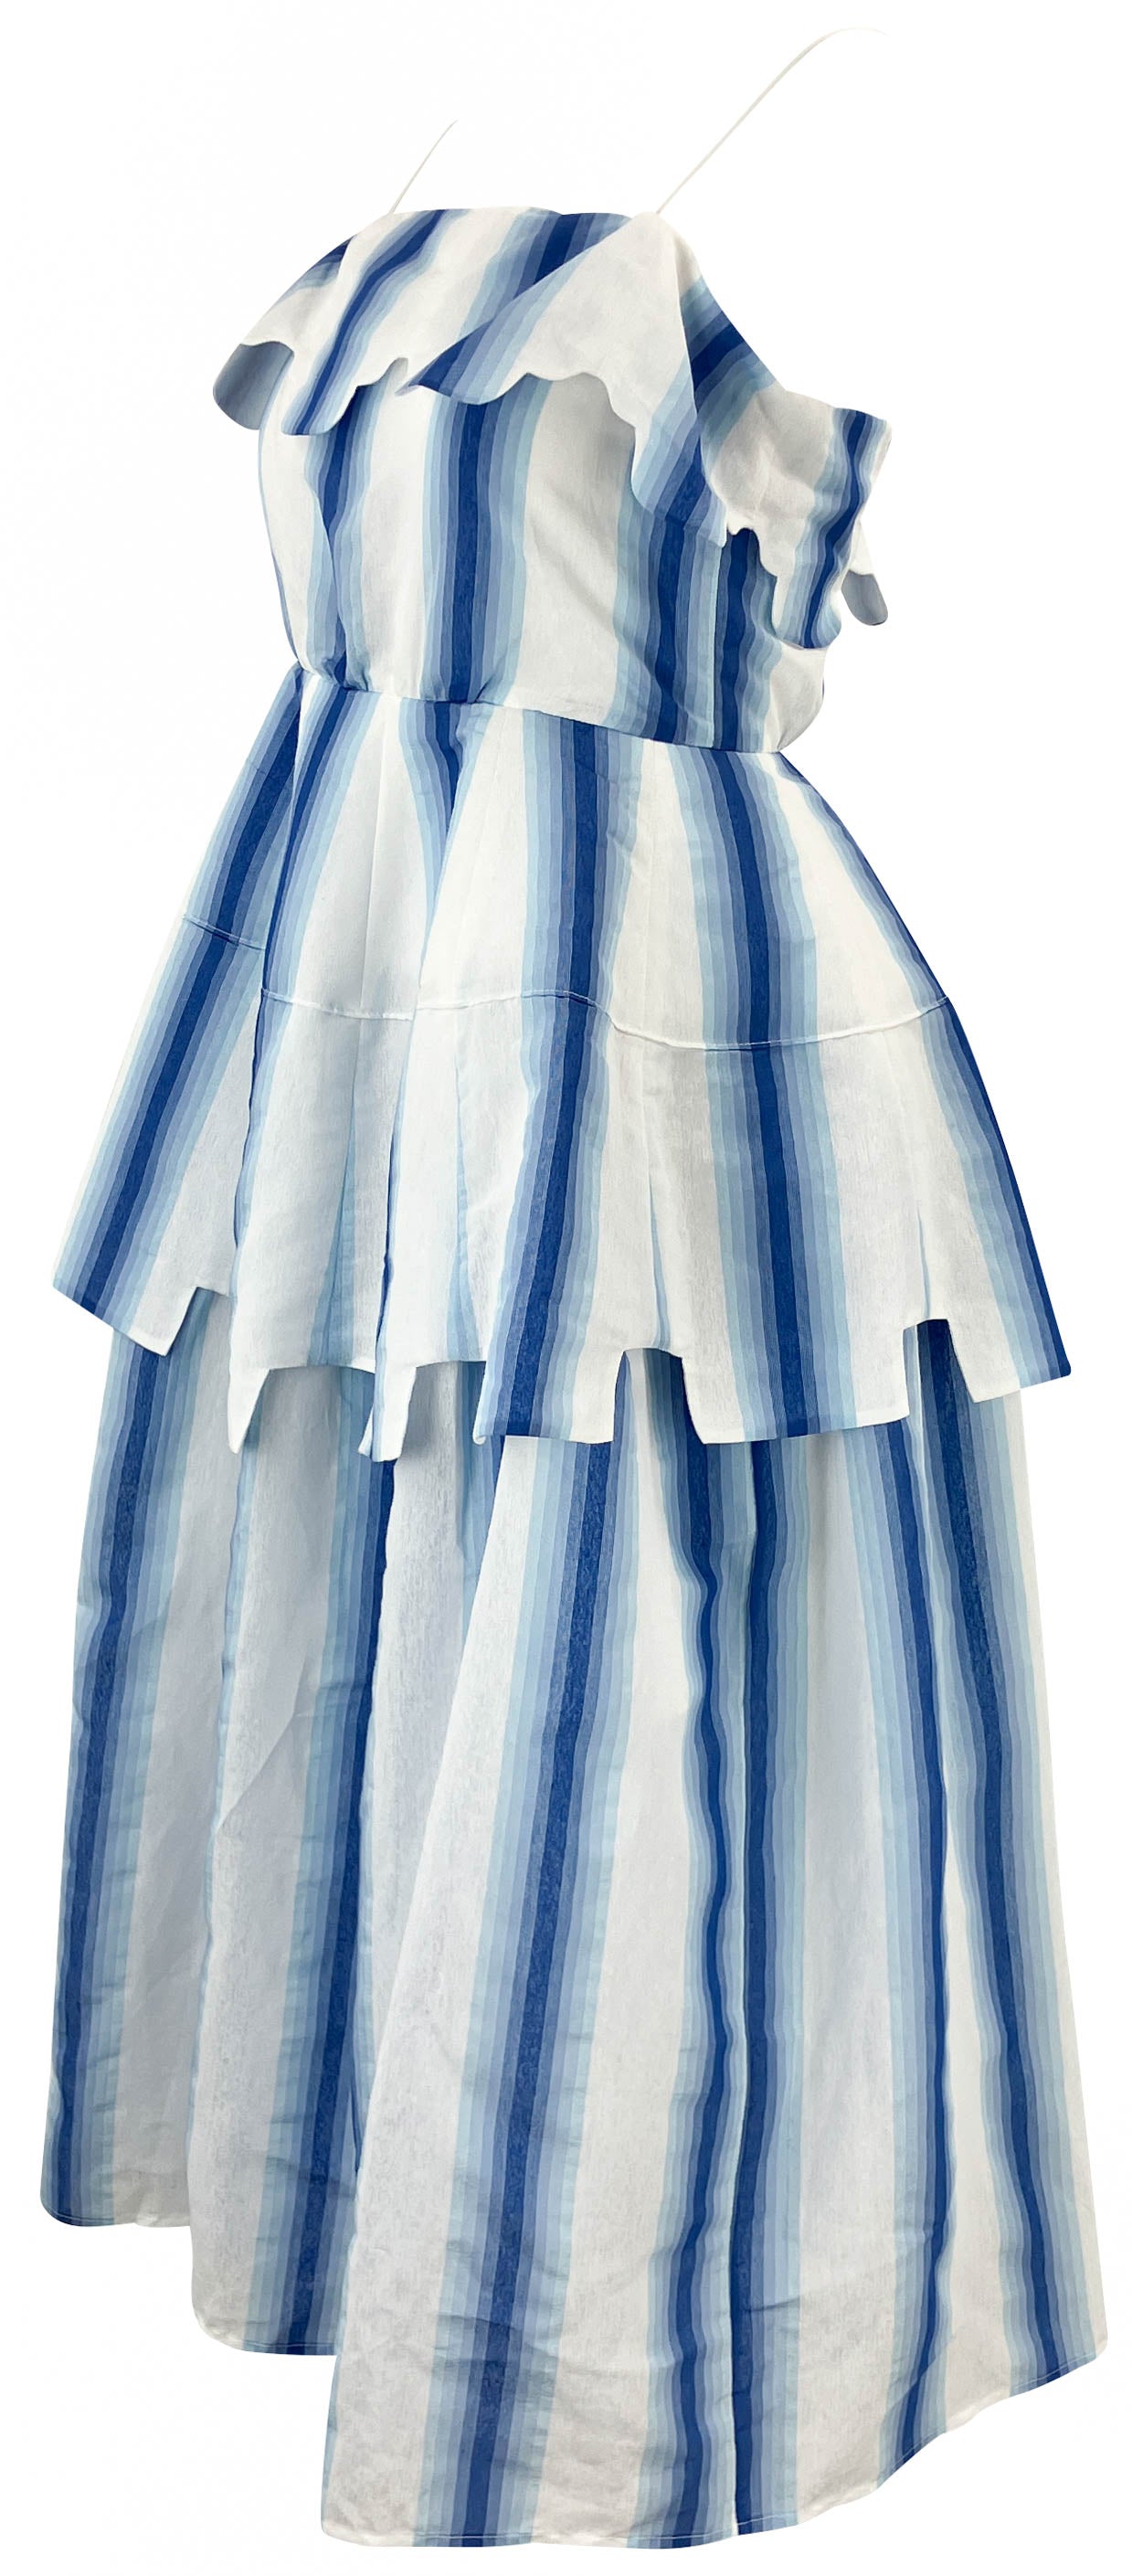 Rosie Assoulin Awning Flared Midi Dress in Blue Ombré - Discounts on Rosie Assoulin at UAL